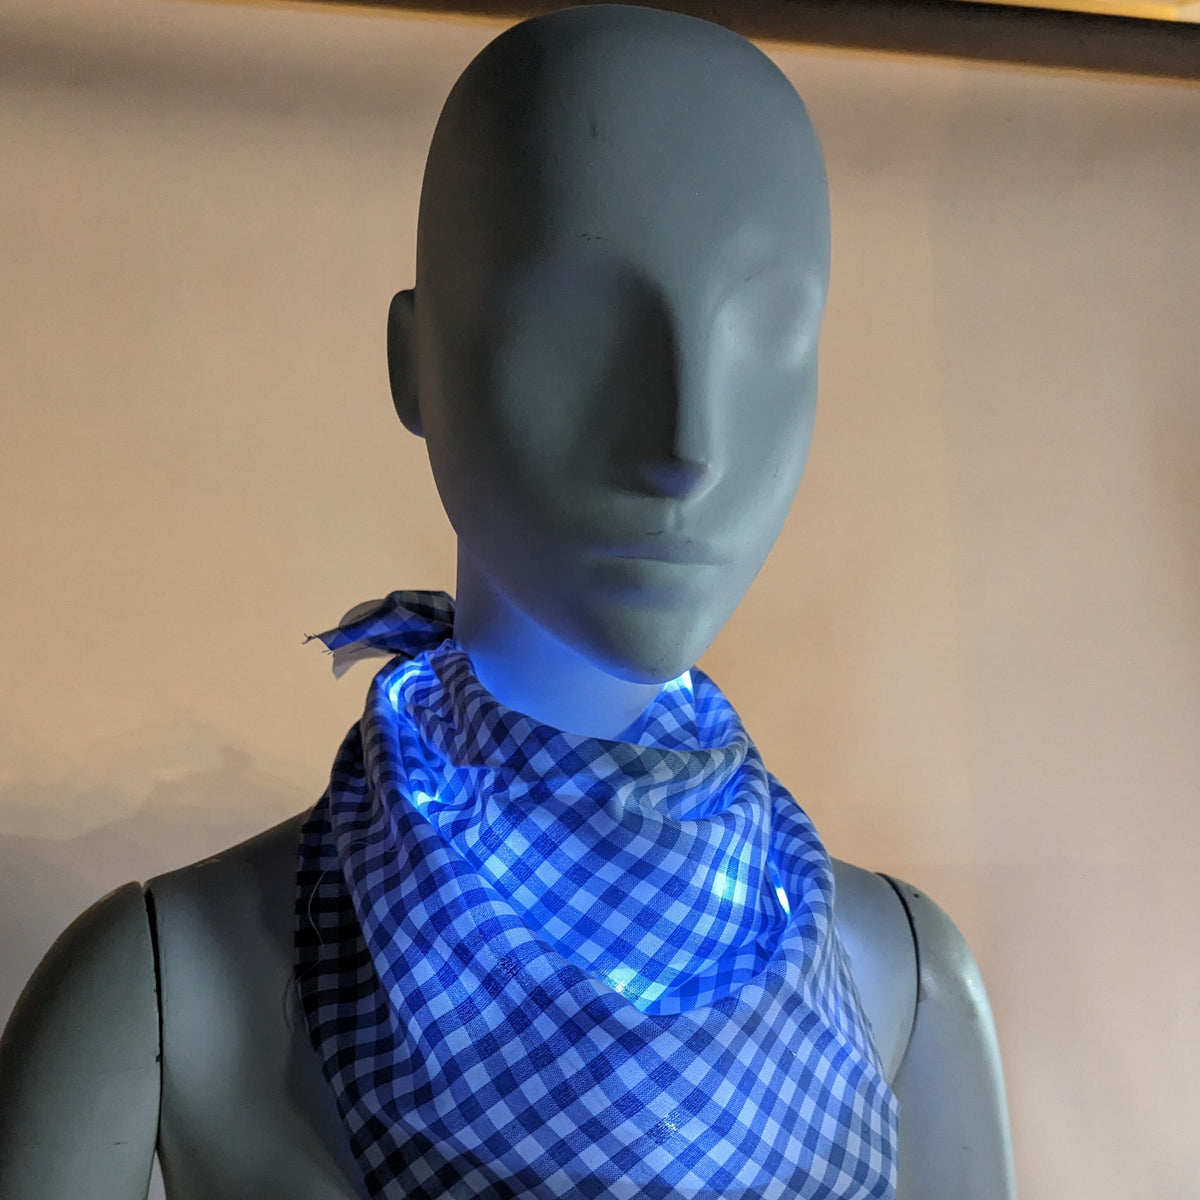 Light up Bandana : PRE-ORDER (Estimate Delivery End of May)